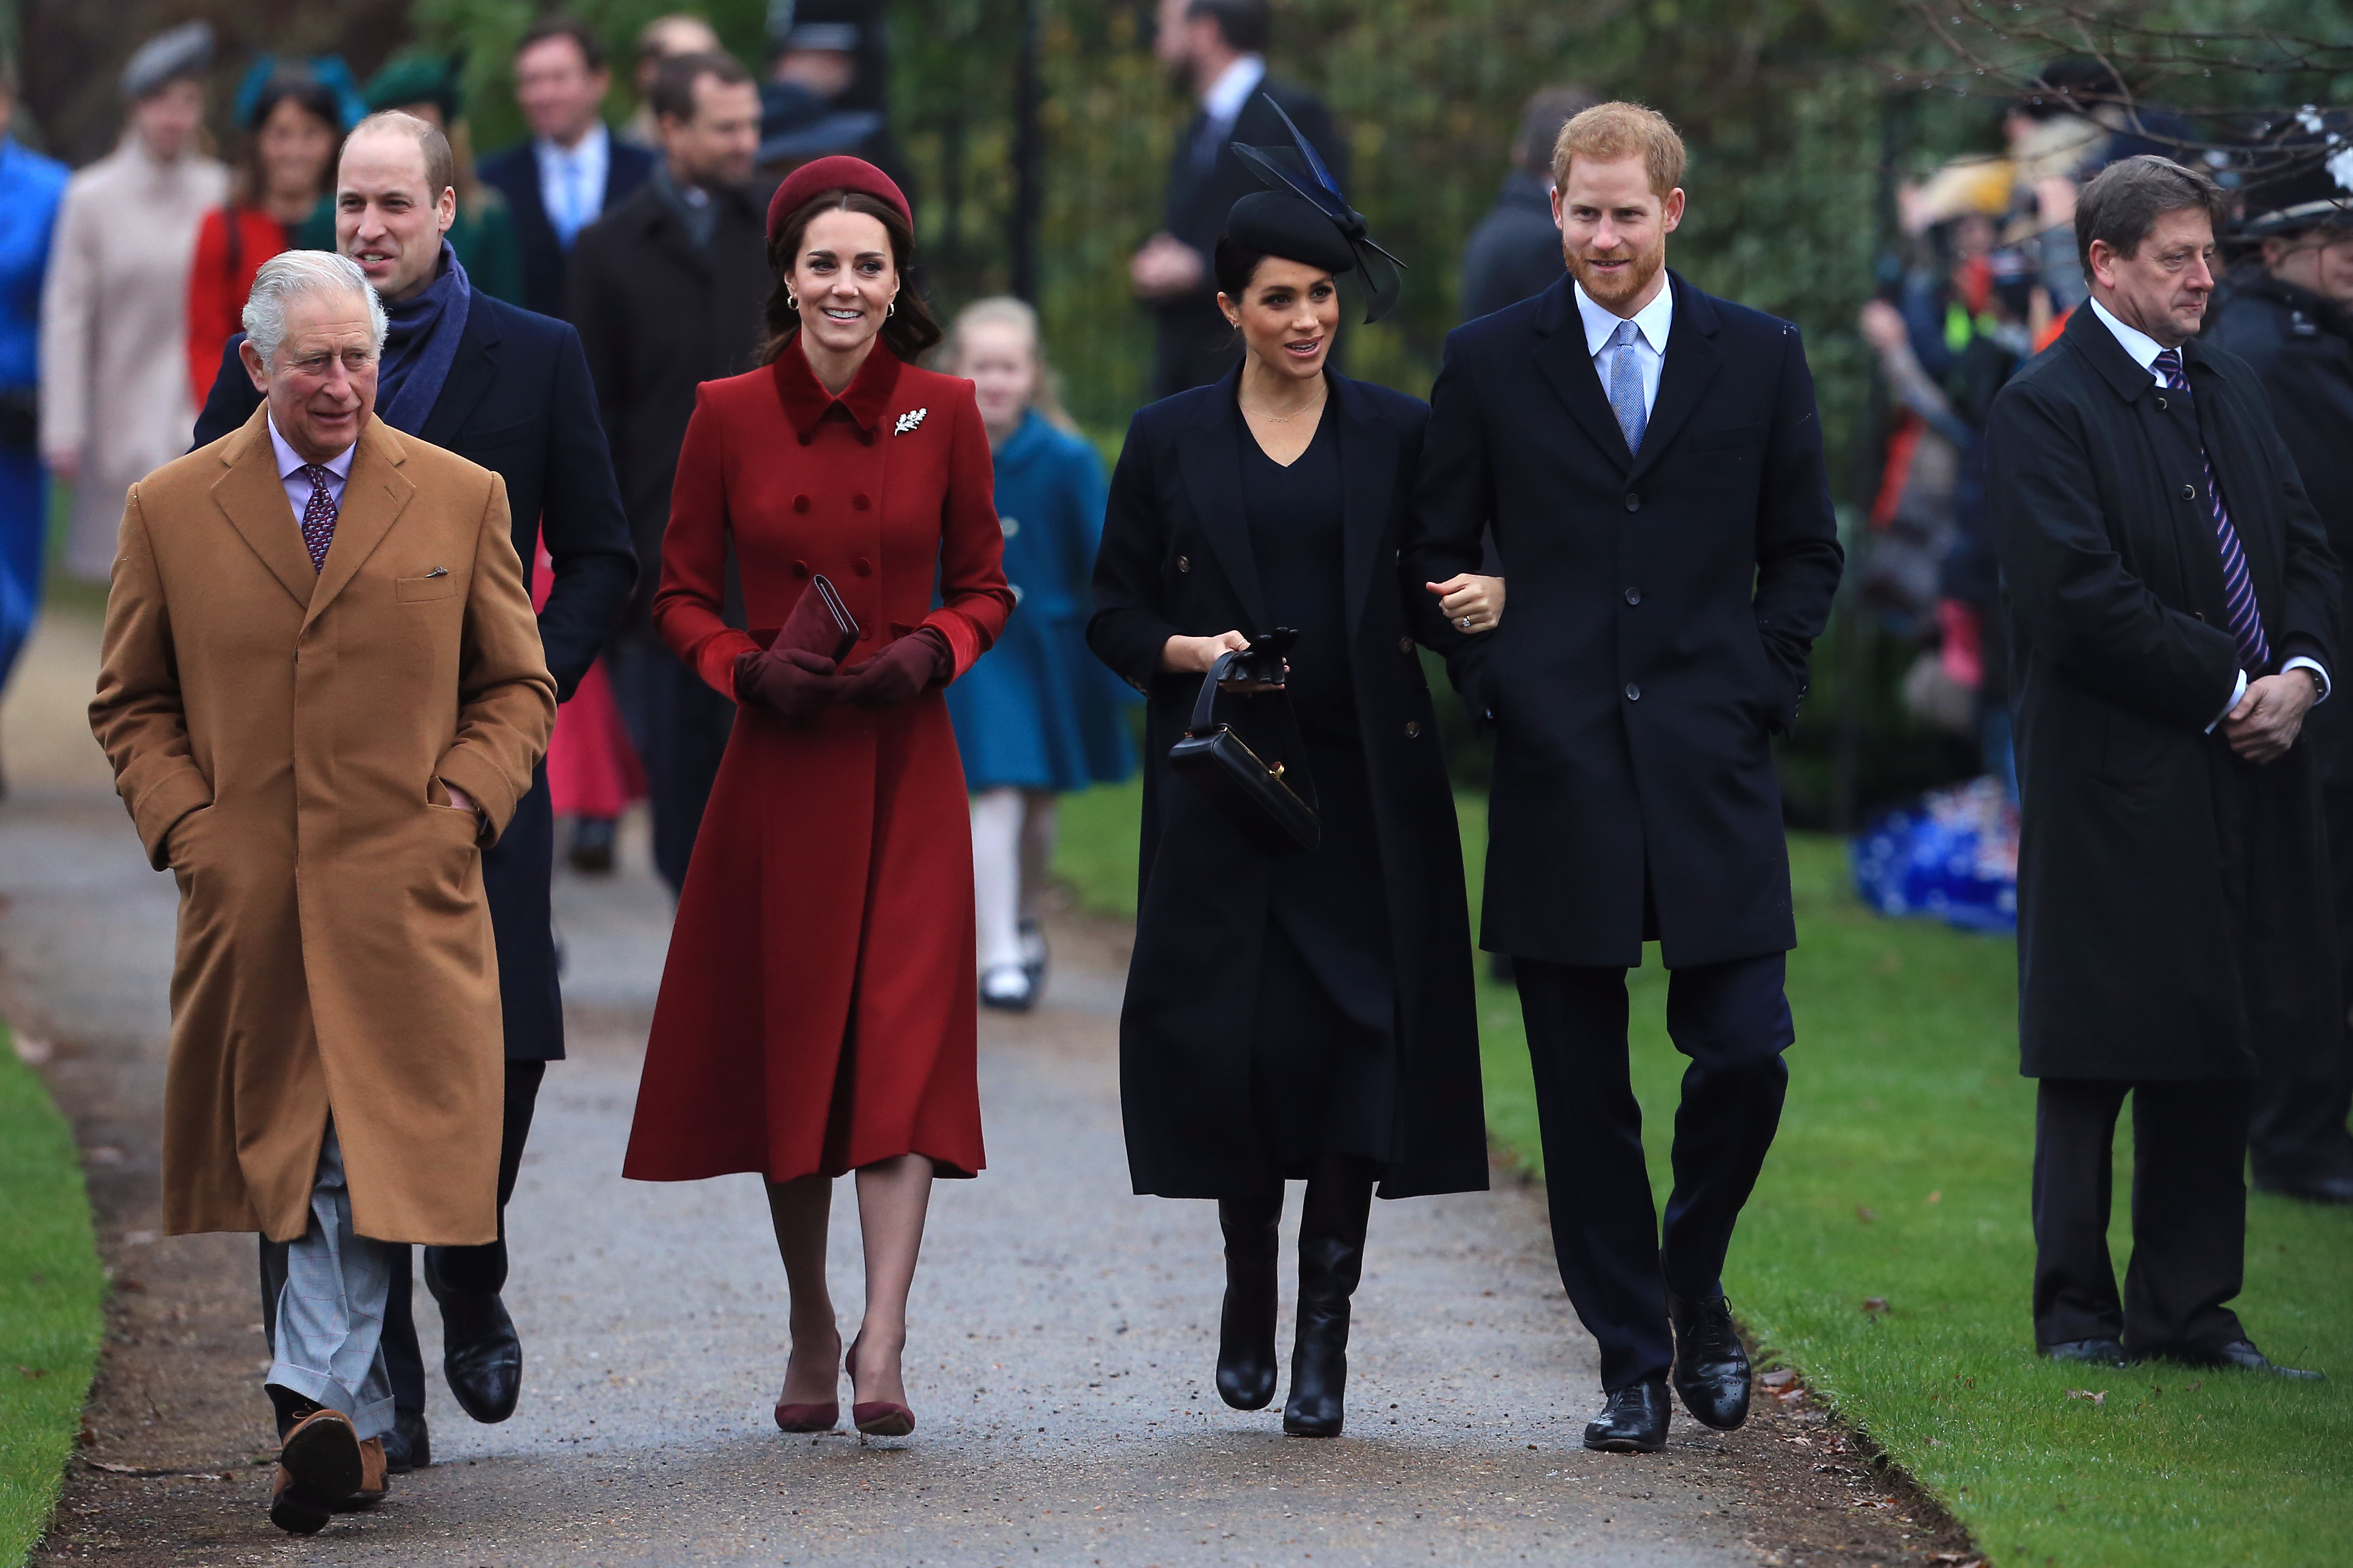 King Charles, Prince William, Catherine, Meghan, and Prince Harry attend Christmas Day Church service on December 25, 2018 in King's Lynn, England | Source: Getty Images